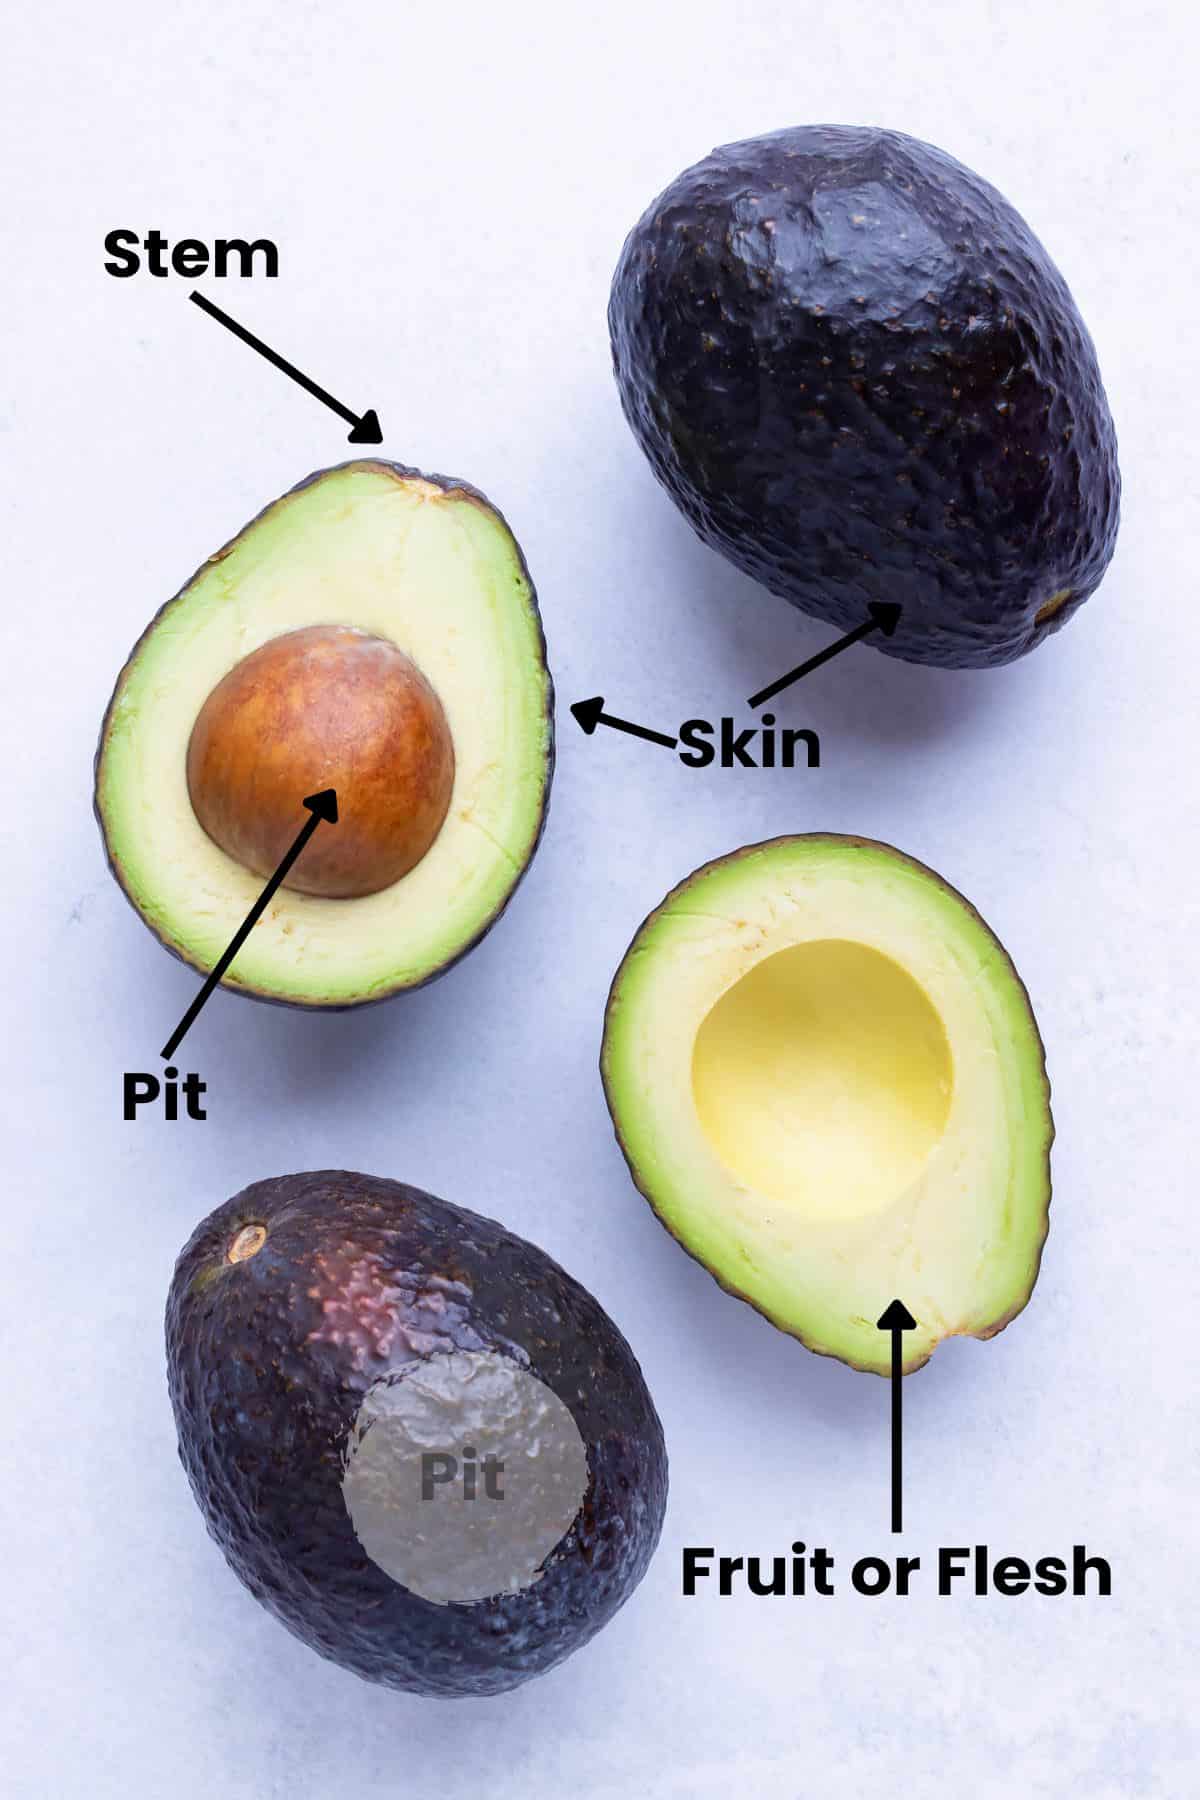 A drawing with arrows showing the pit, peel or skin, flesh or fruit, and stem of avocados.